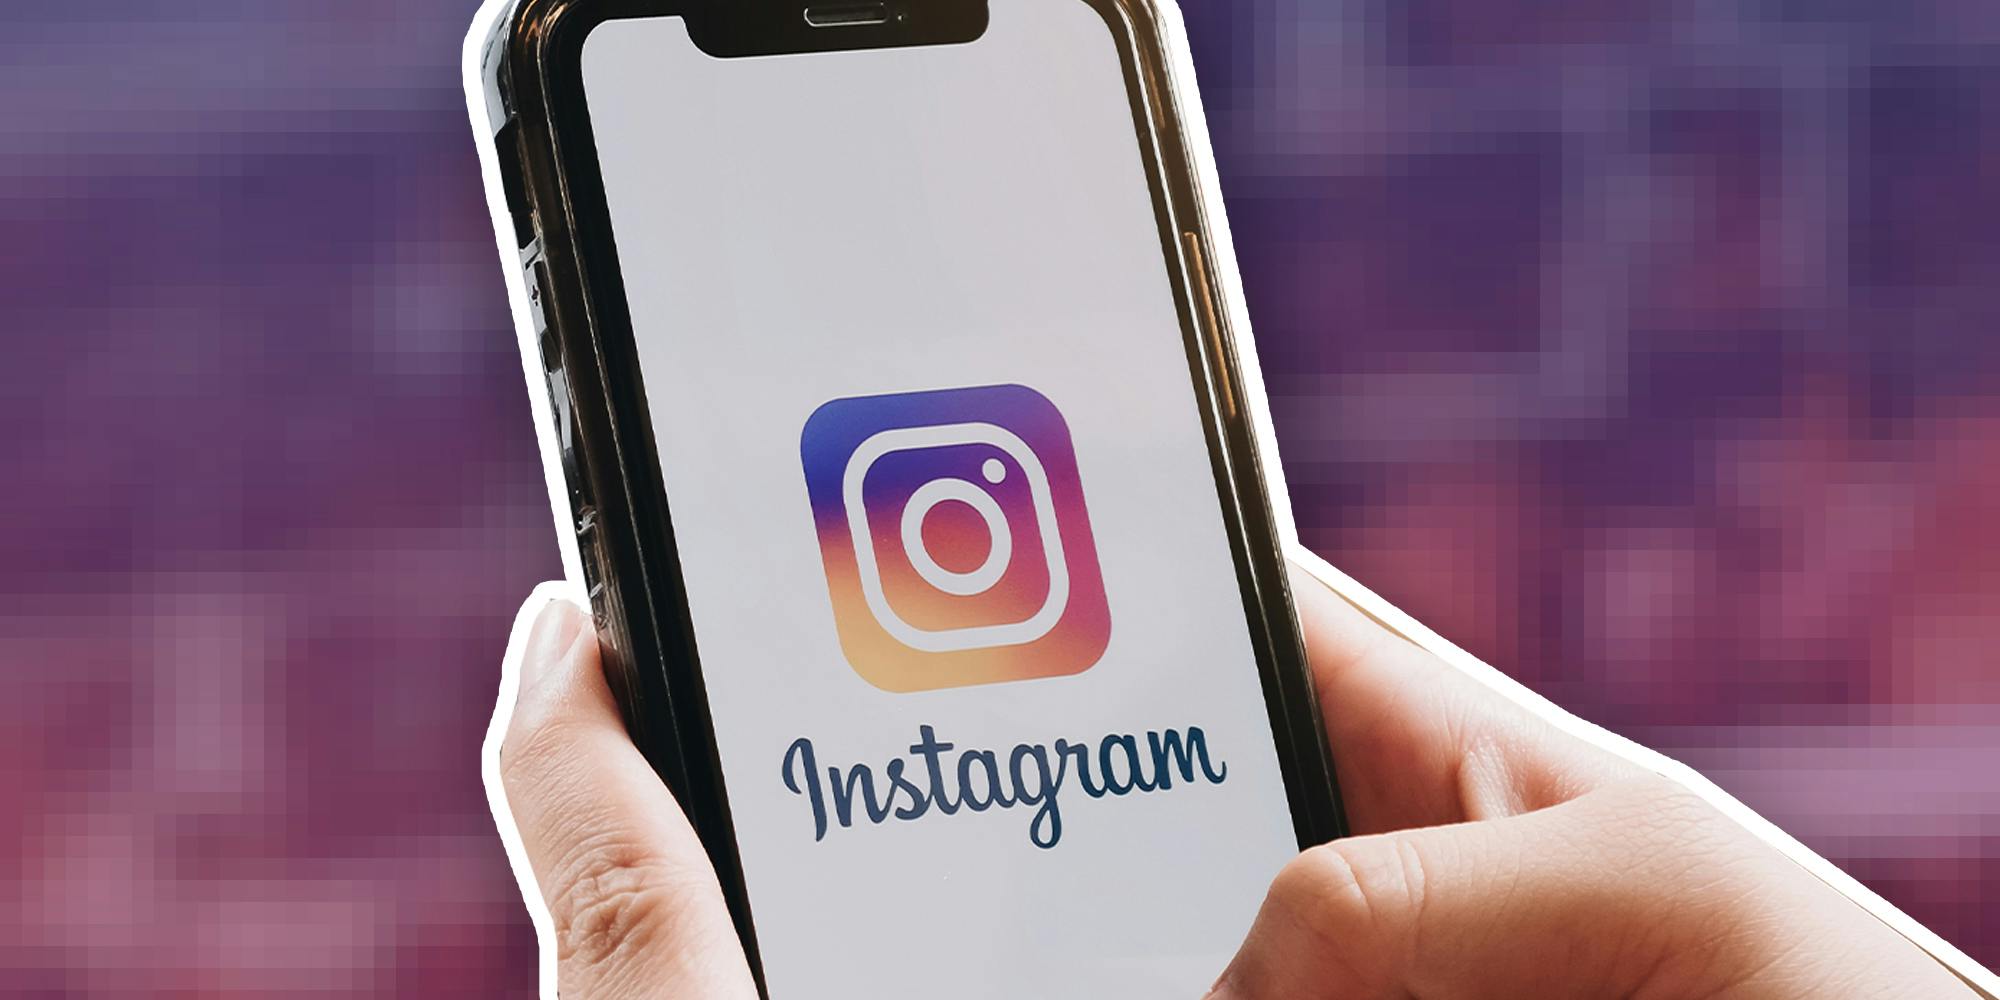 What is going on with Instagram and all the adult content?